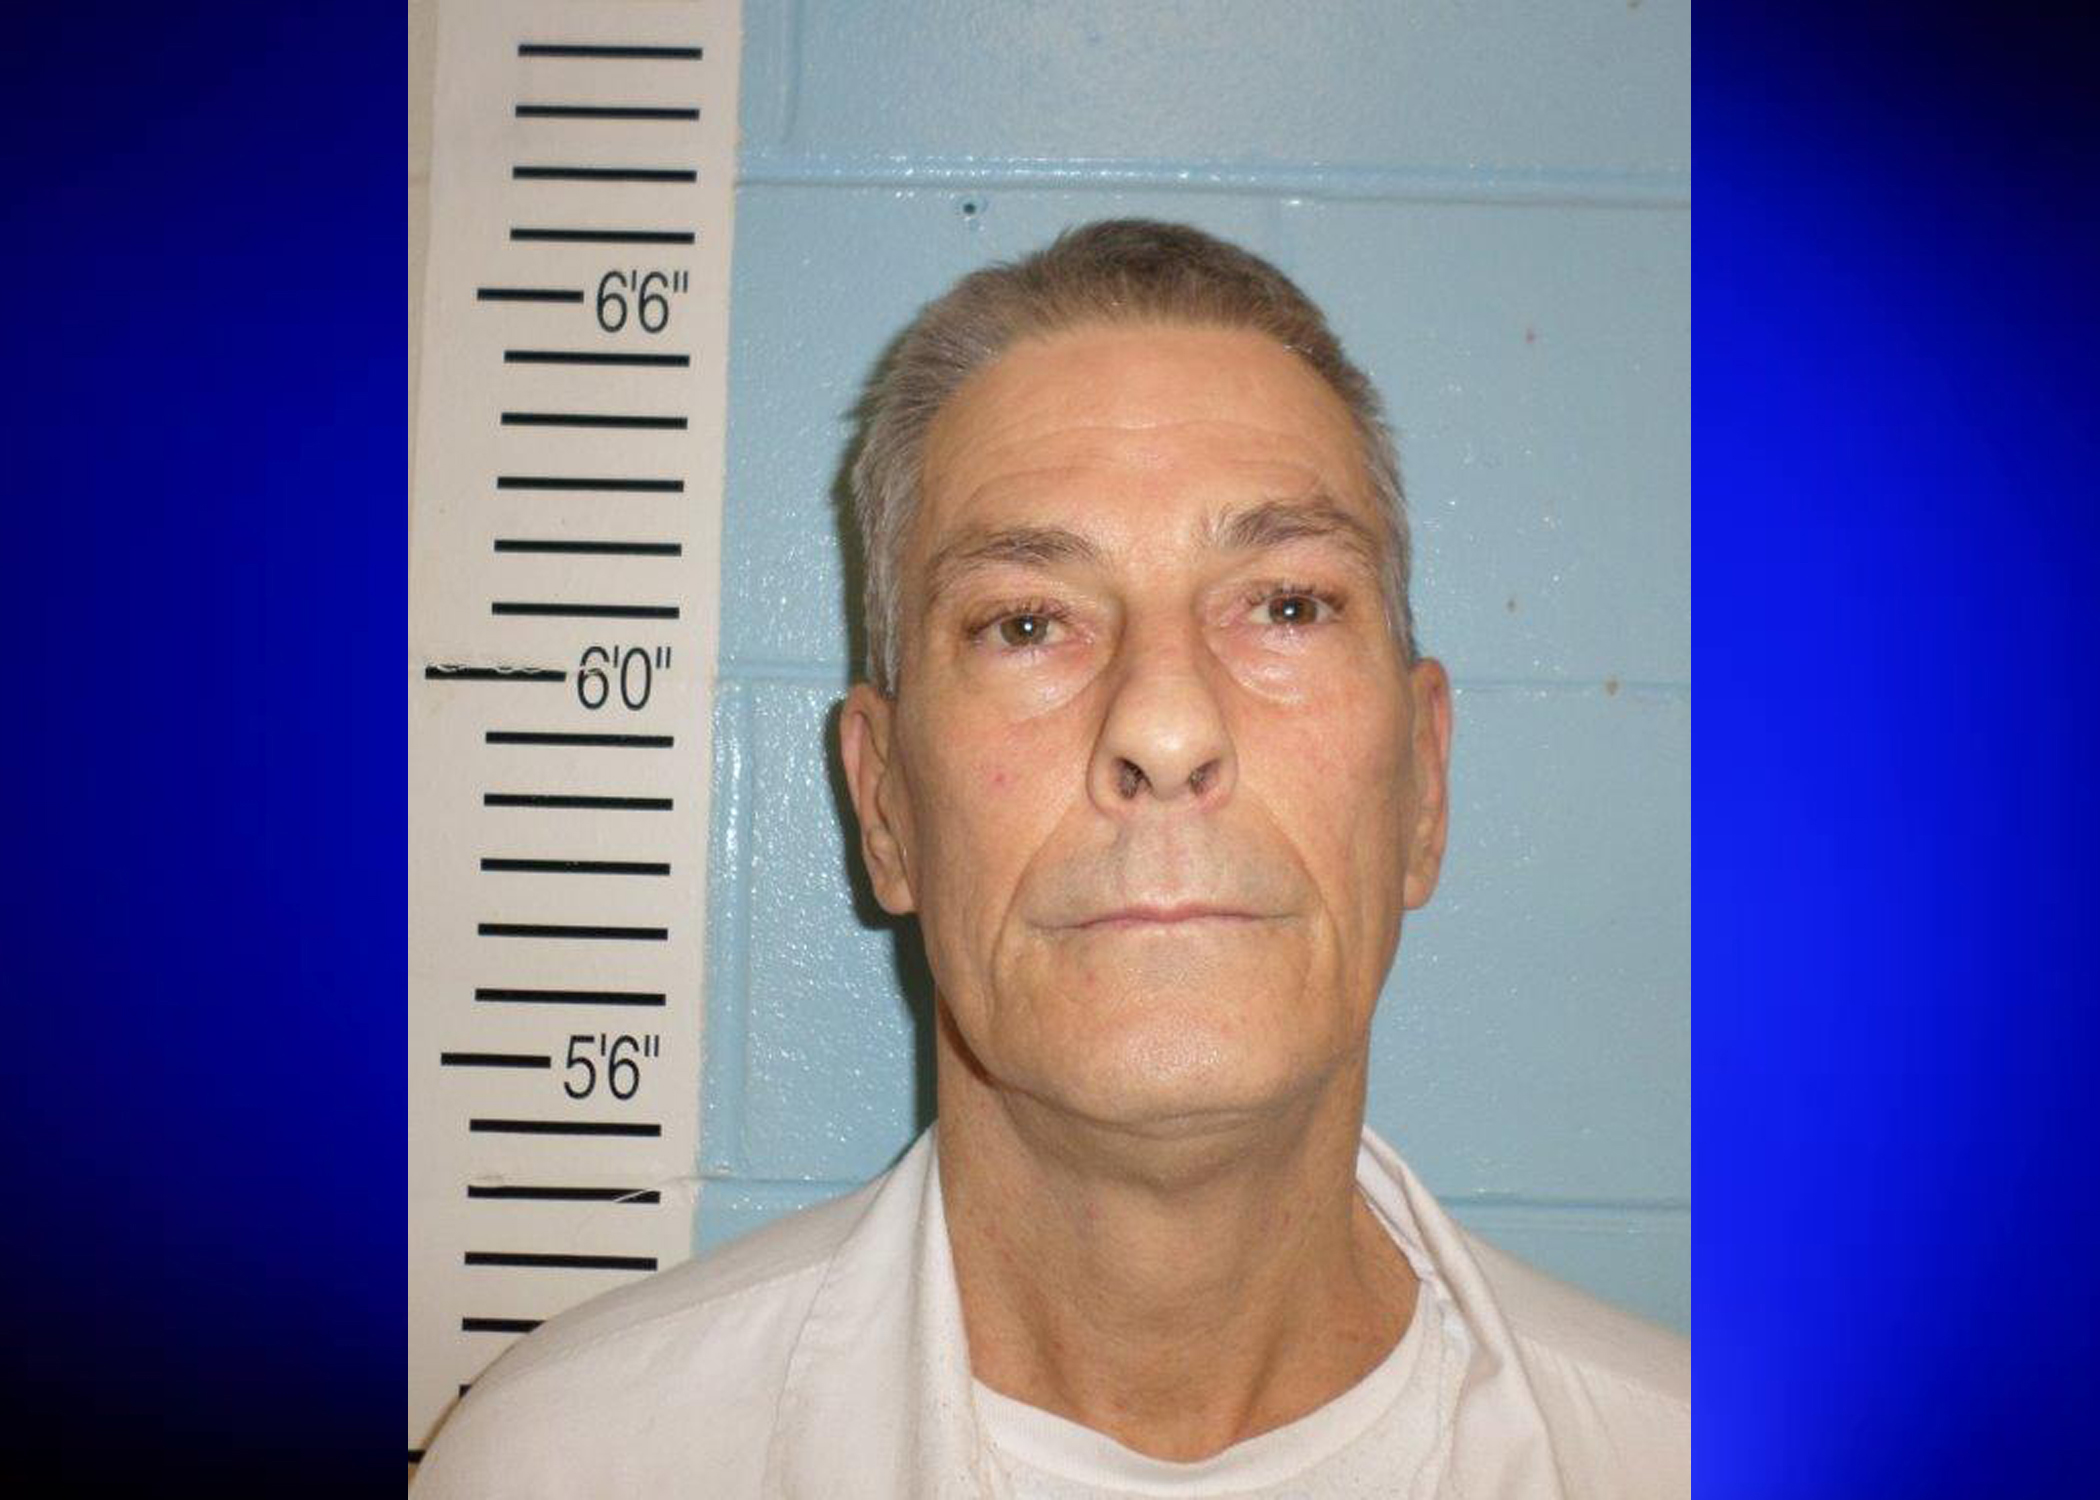 Man serving life sentences for rape in Jefferson County and kidnapping in St. Clair County dies